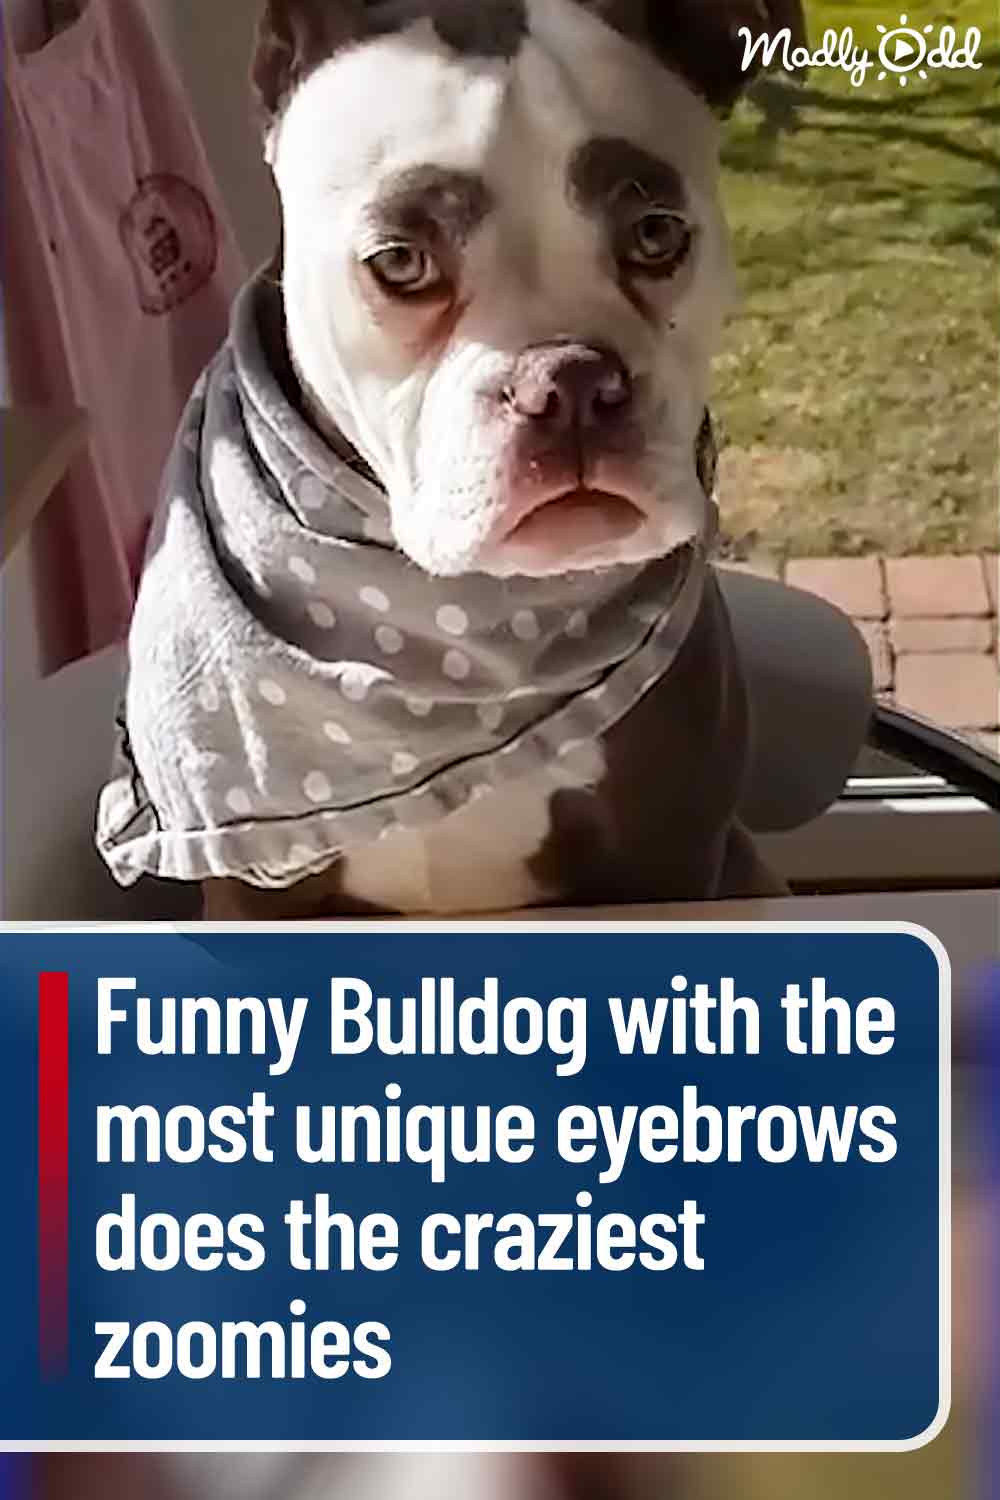 Funny Bulldog with the most unique eyebrows does the craziest zoomies